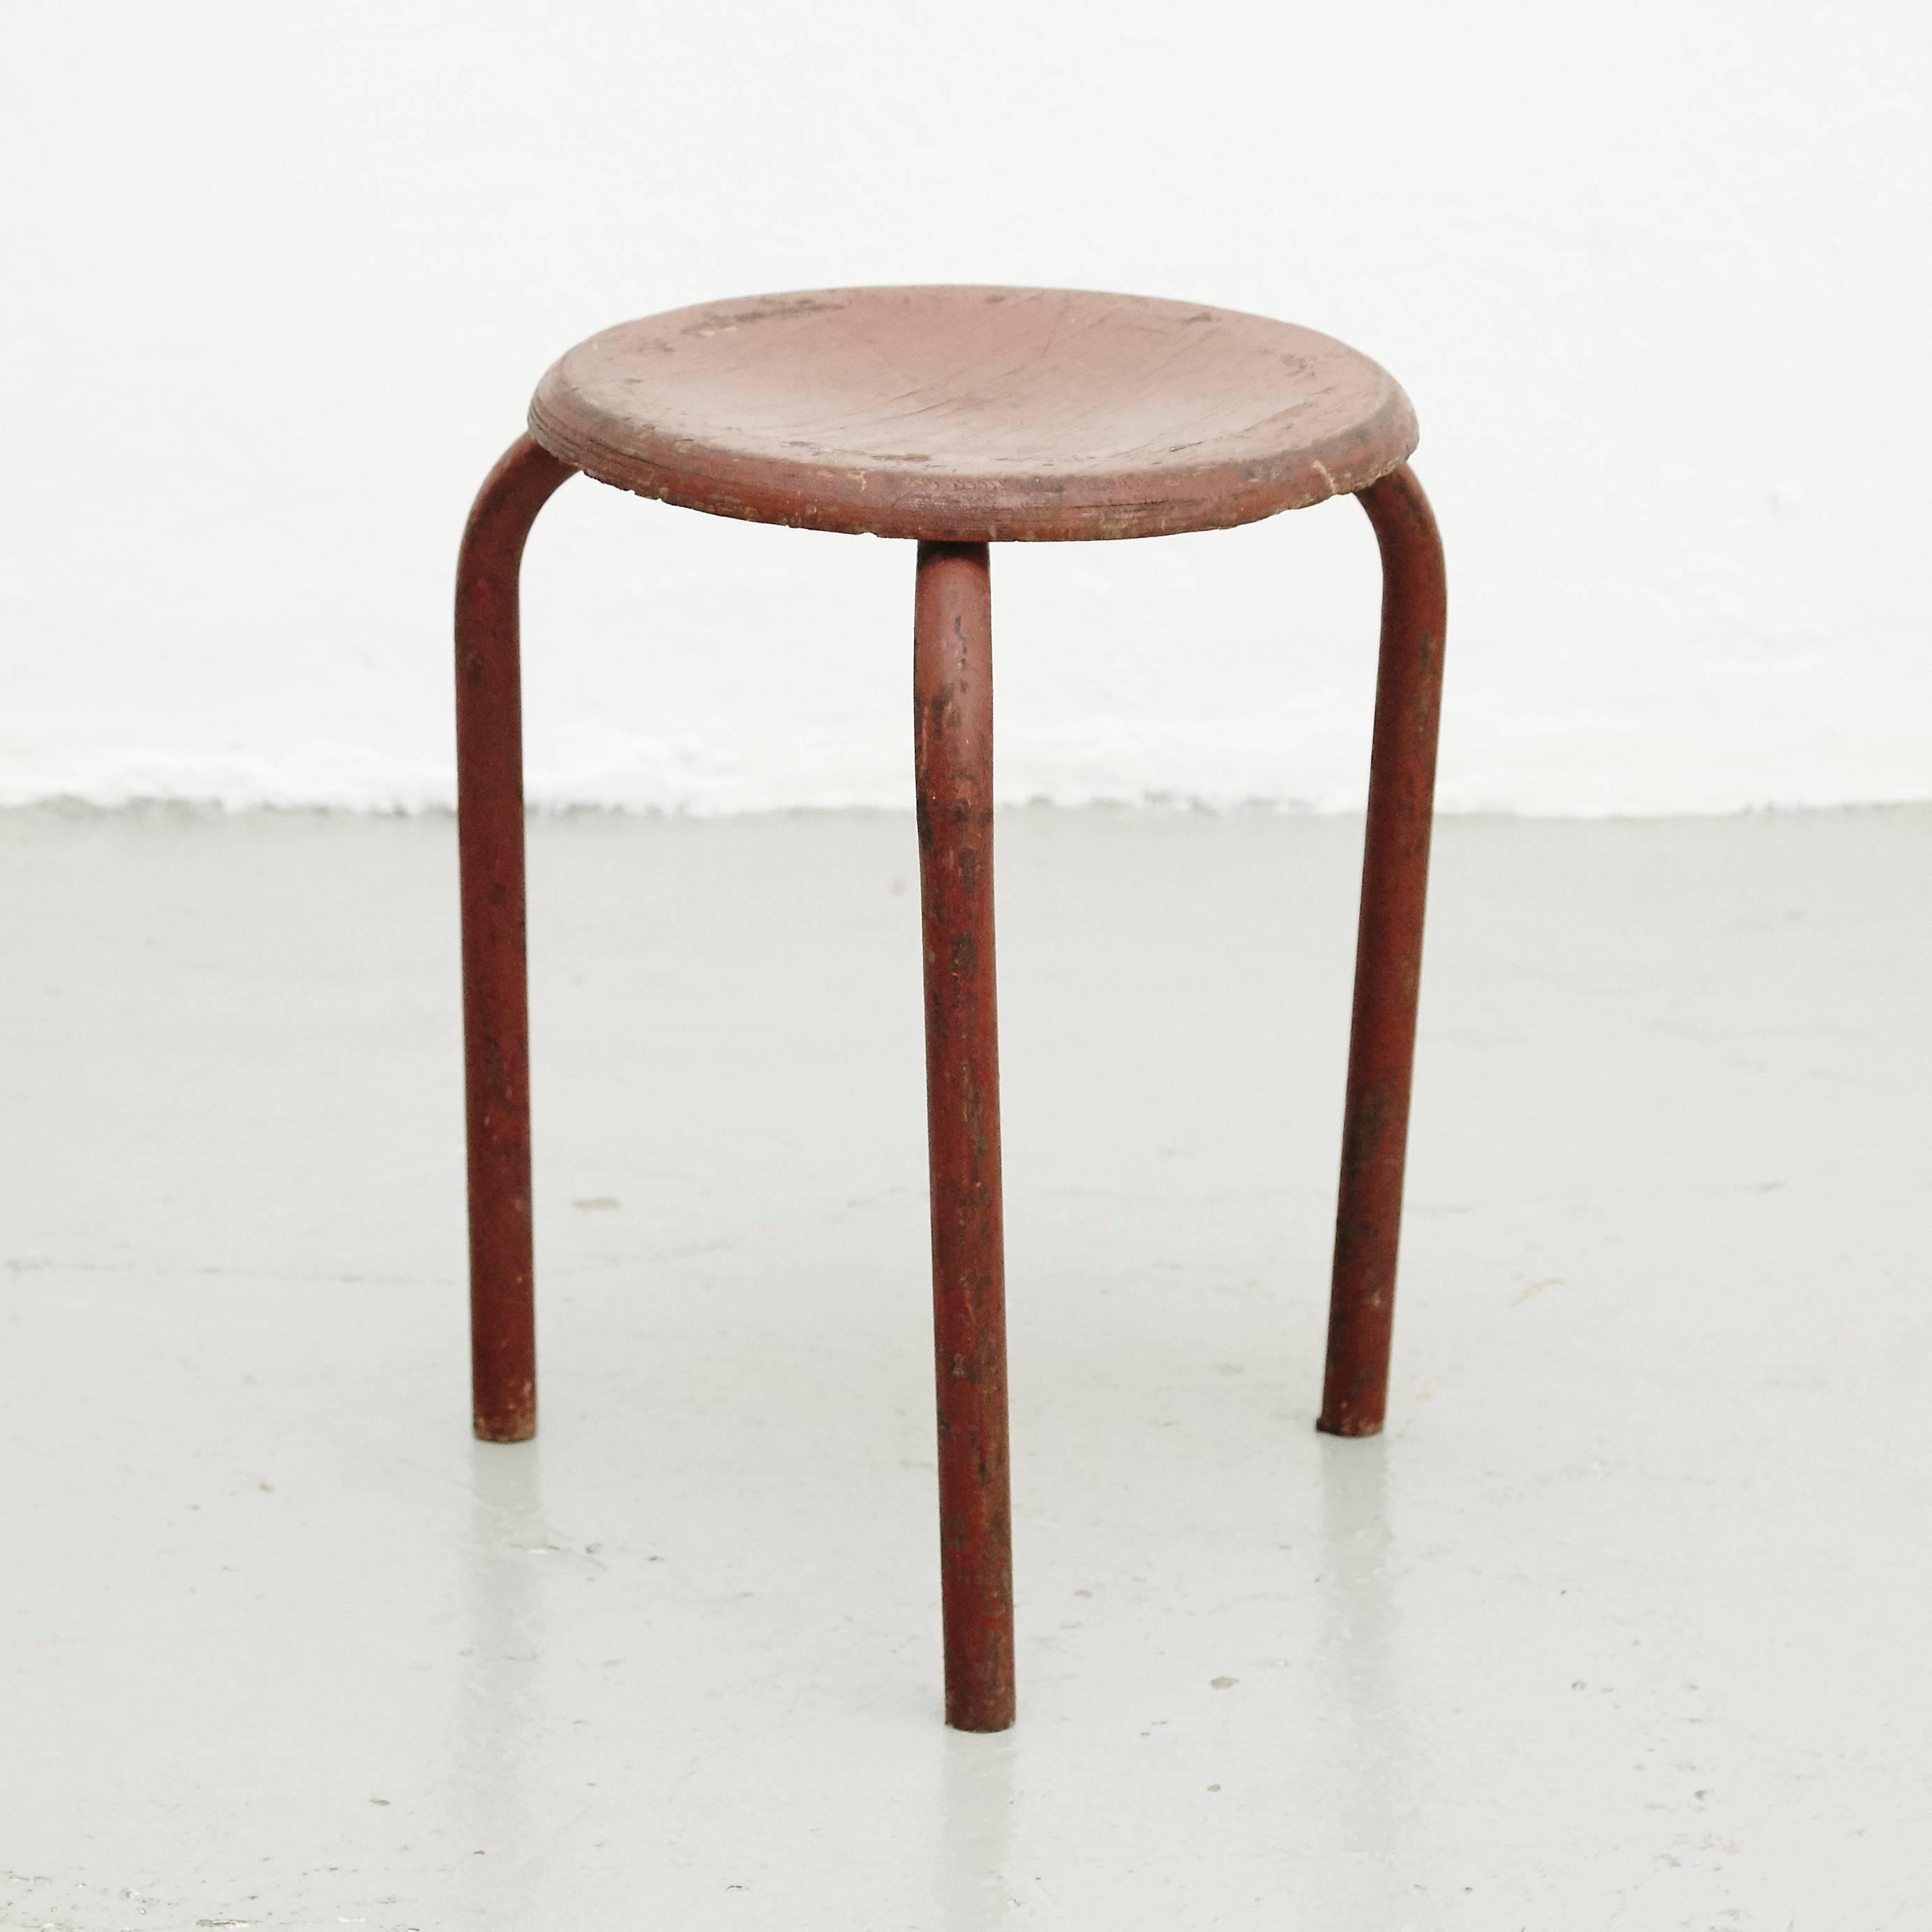 Stool design attributed to Jean Prouvé, circa 1950.
Manufactured in (France)
Lacquered metal base and laminated wood seat.

In good original condition, with minor wear consistent with age and use, preserving a beautiful patina.